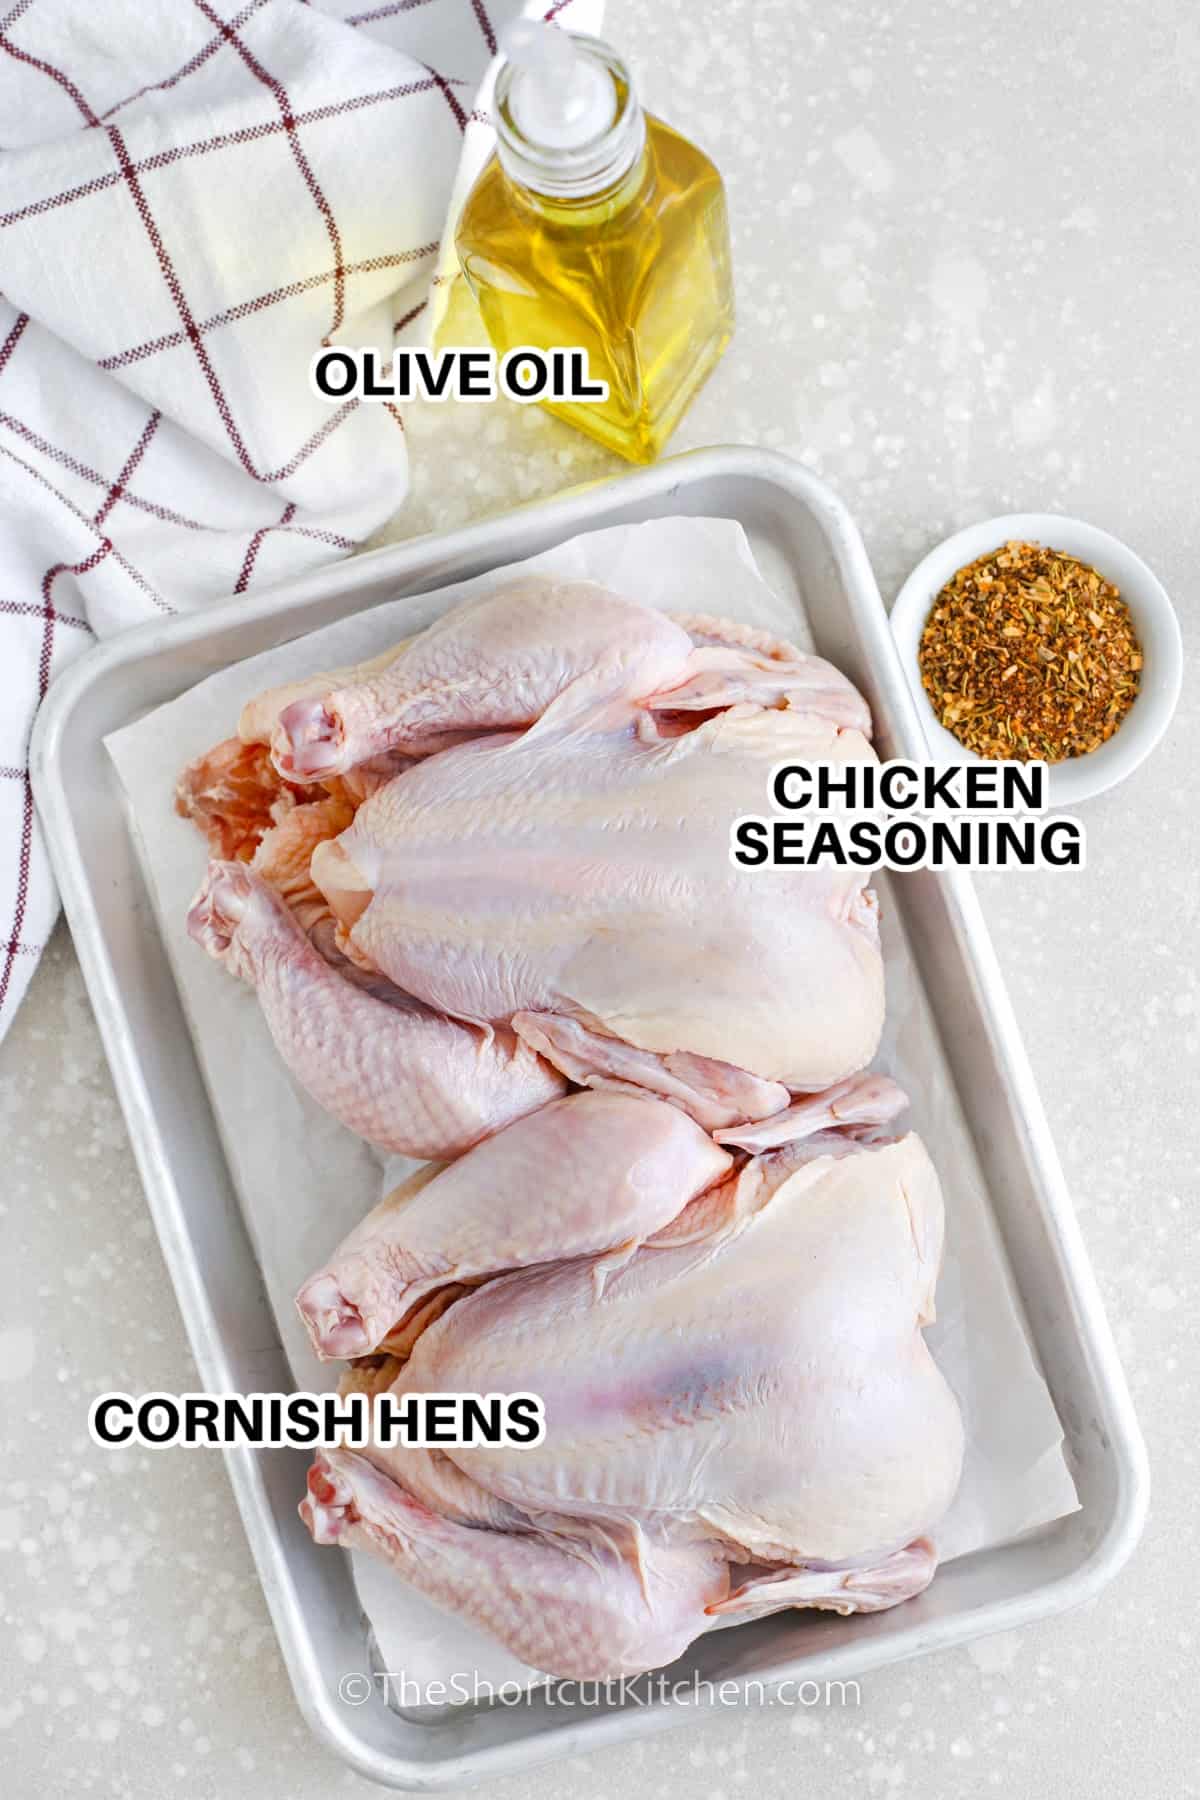 Ingredients to make baked cornish hen labeled: olive oil, chicken seasoning, and cornish hens